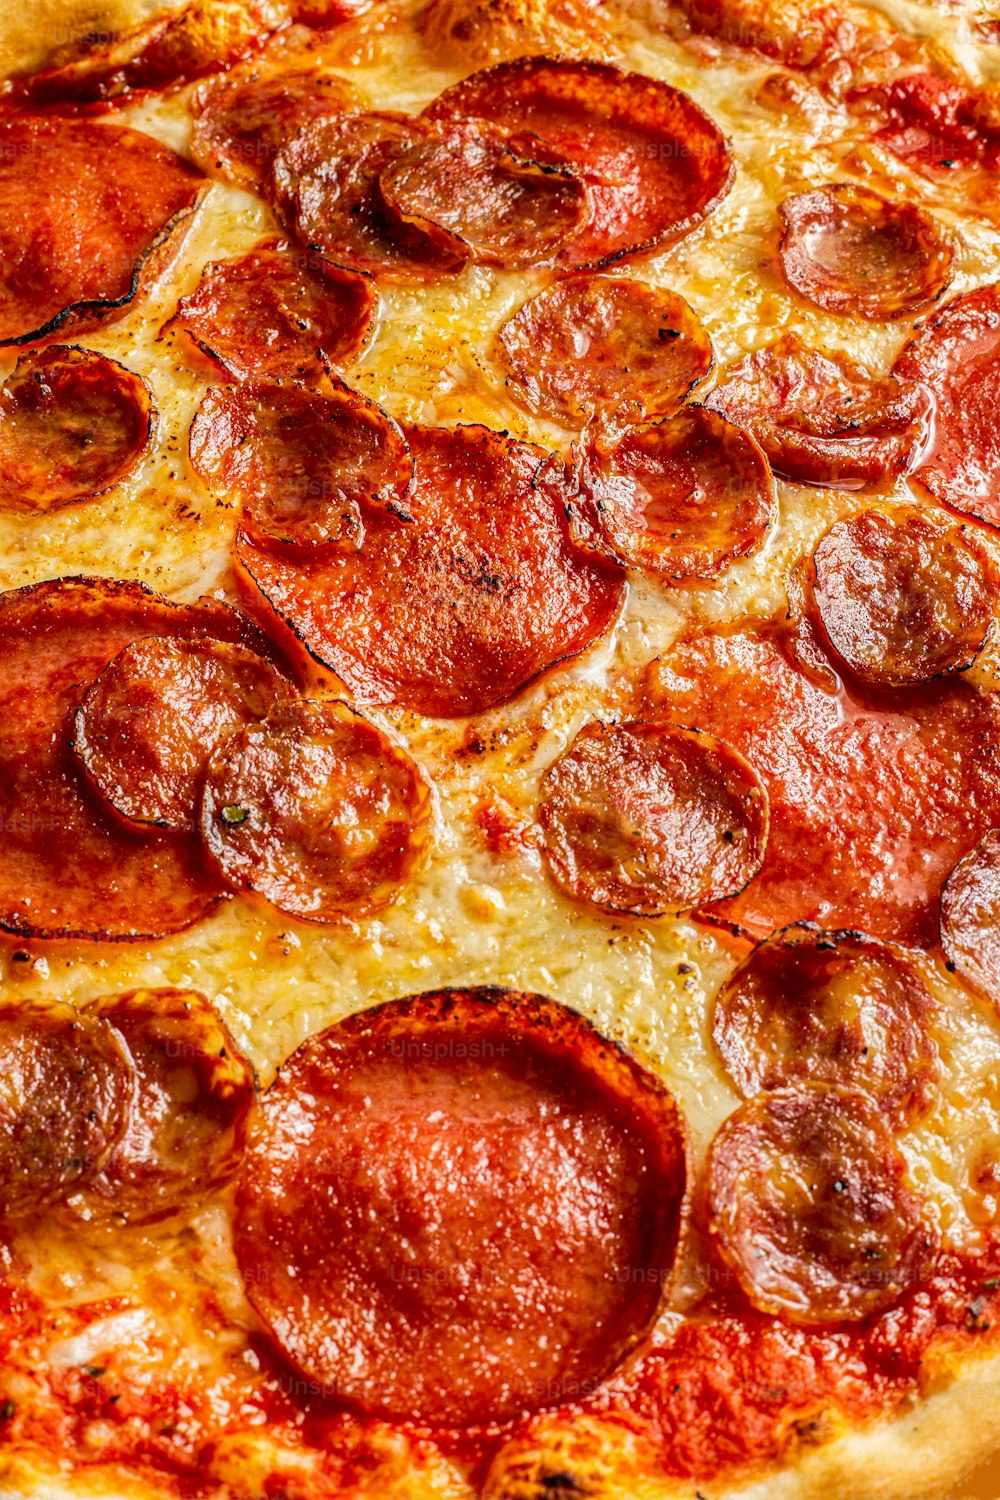 a pepperoni pizza is shown on a table